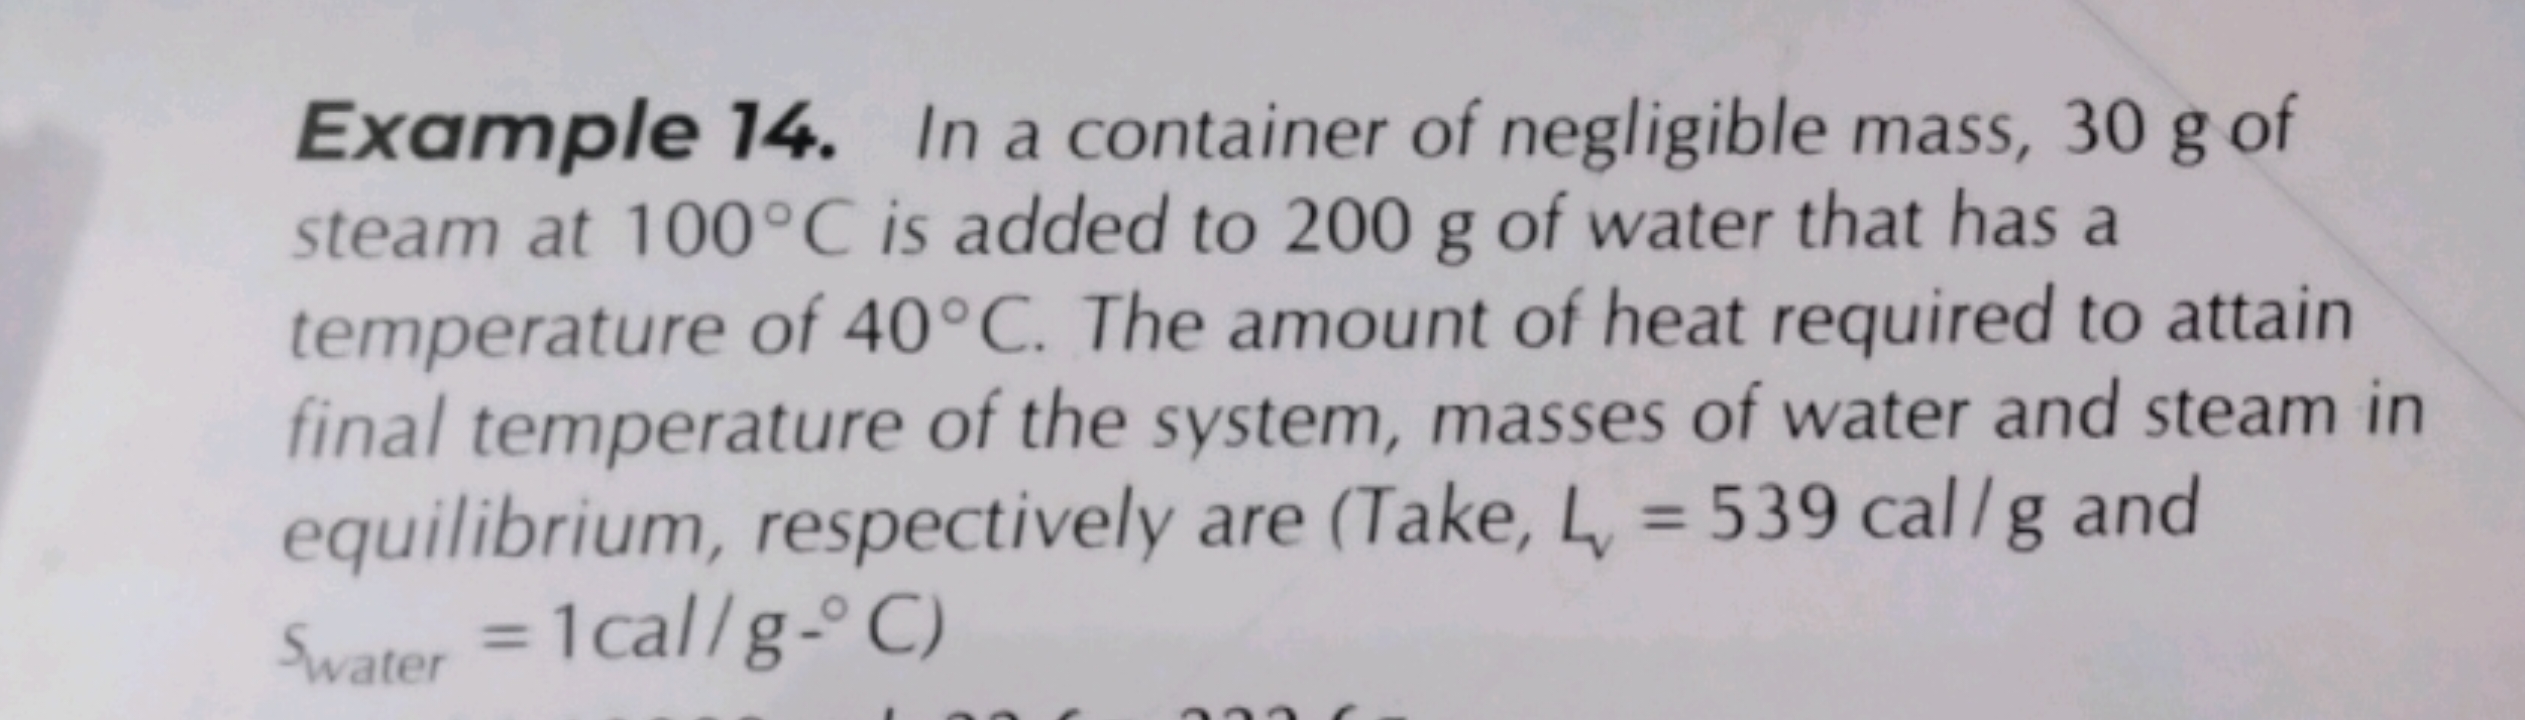 Example 14. In a container of negligible mass, 30 g of steam at 100∘C 